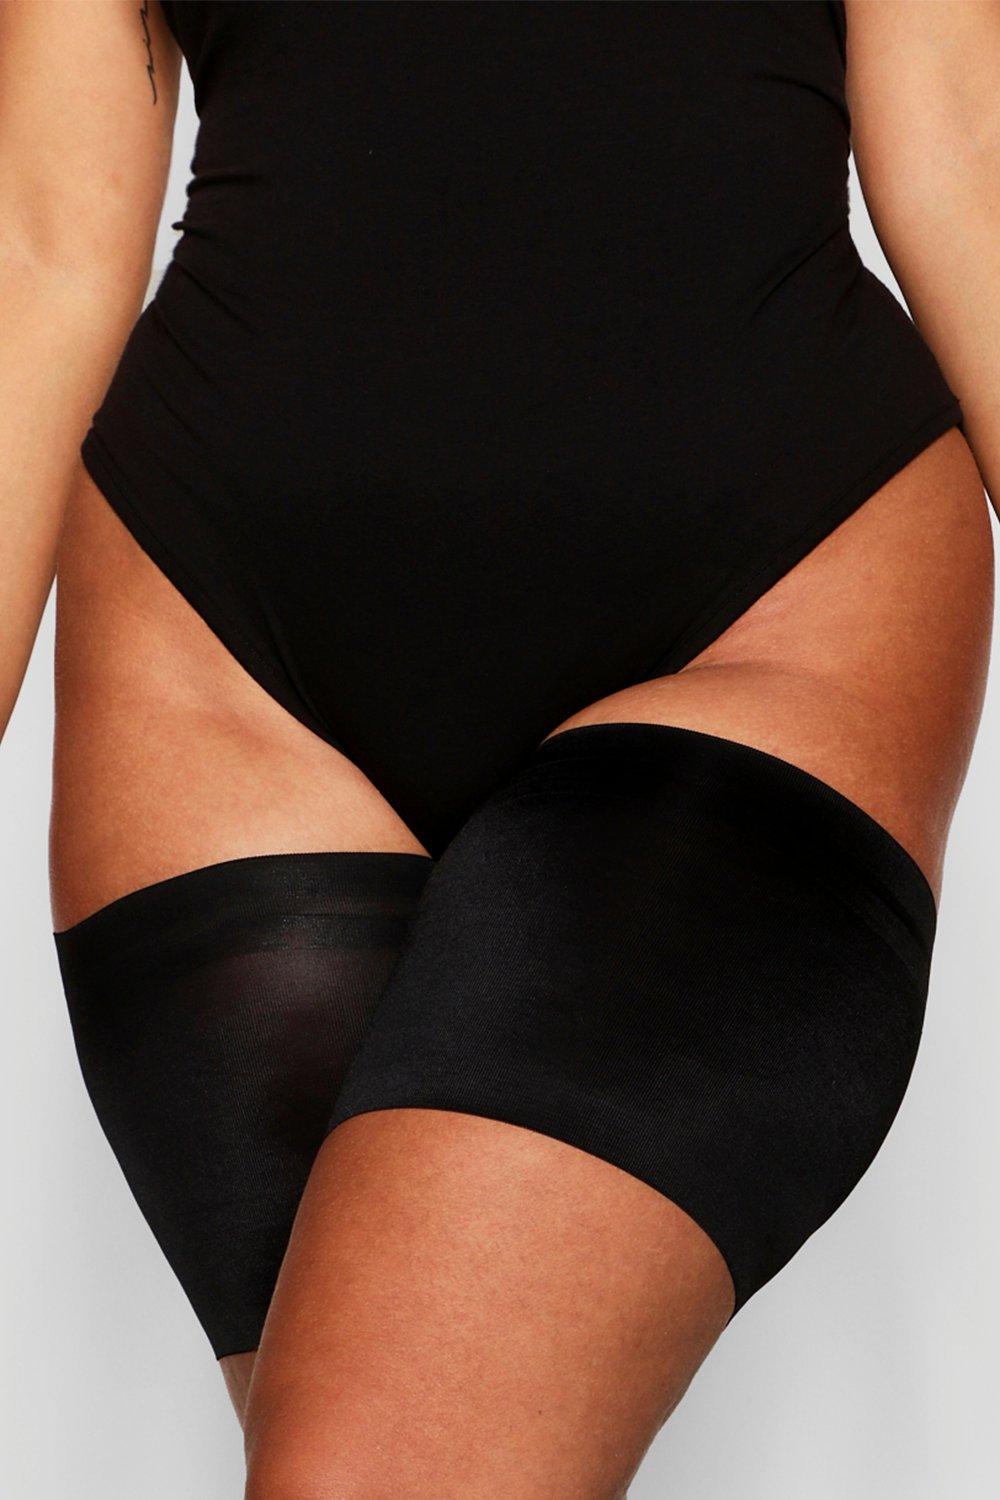 Boohoo Plus 2 Pack Anti Chafing Thigh Bands- Black  - Size: 16